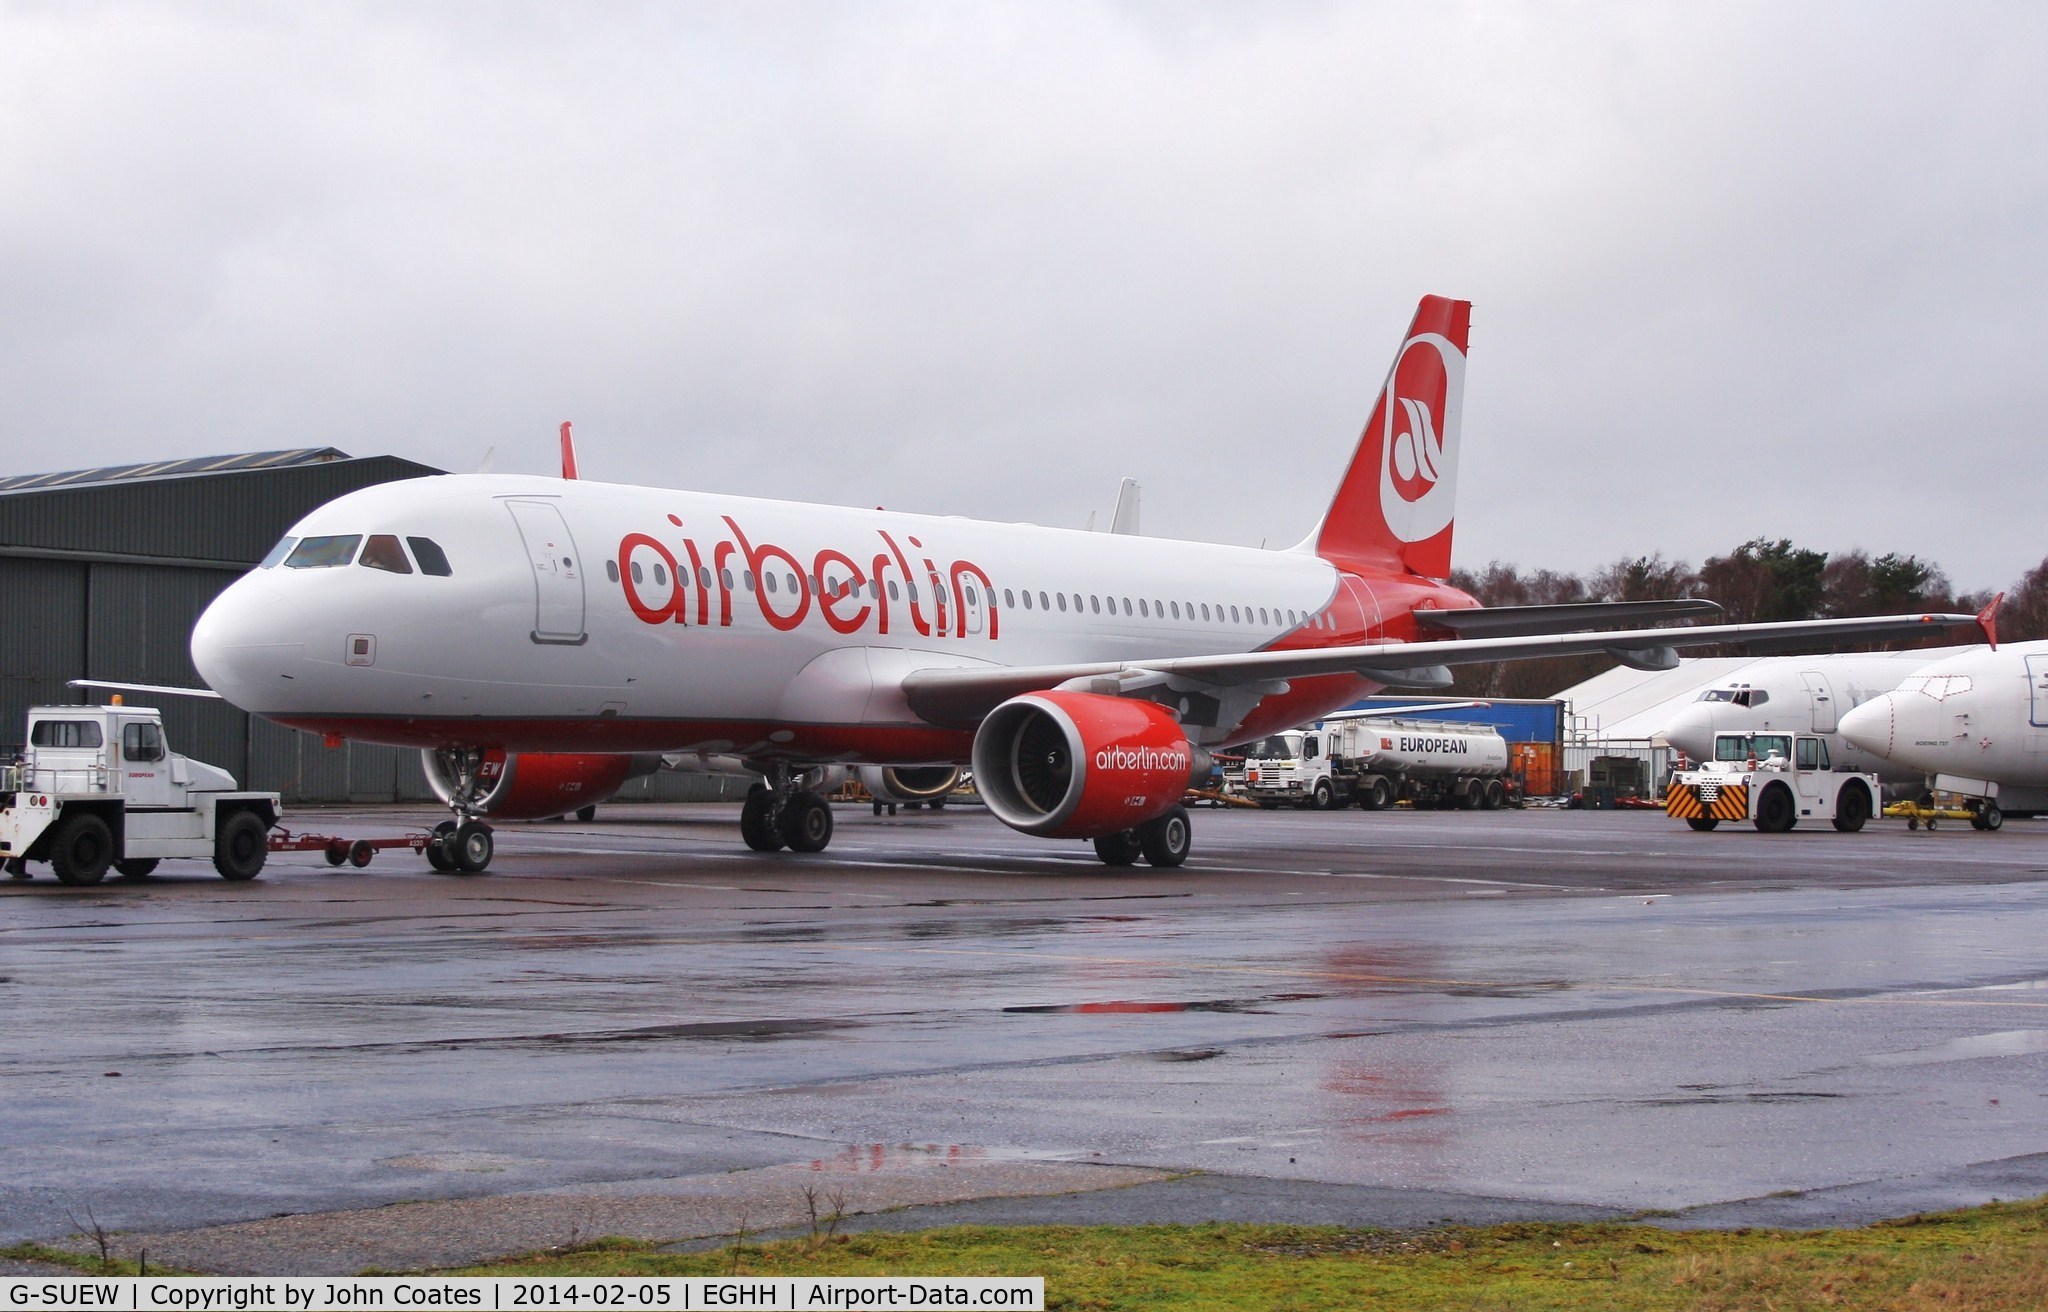 G-SUEW, 2003 Airbus A320-214 C/N 1961, Just resprayed